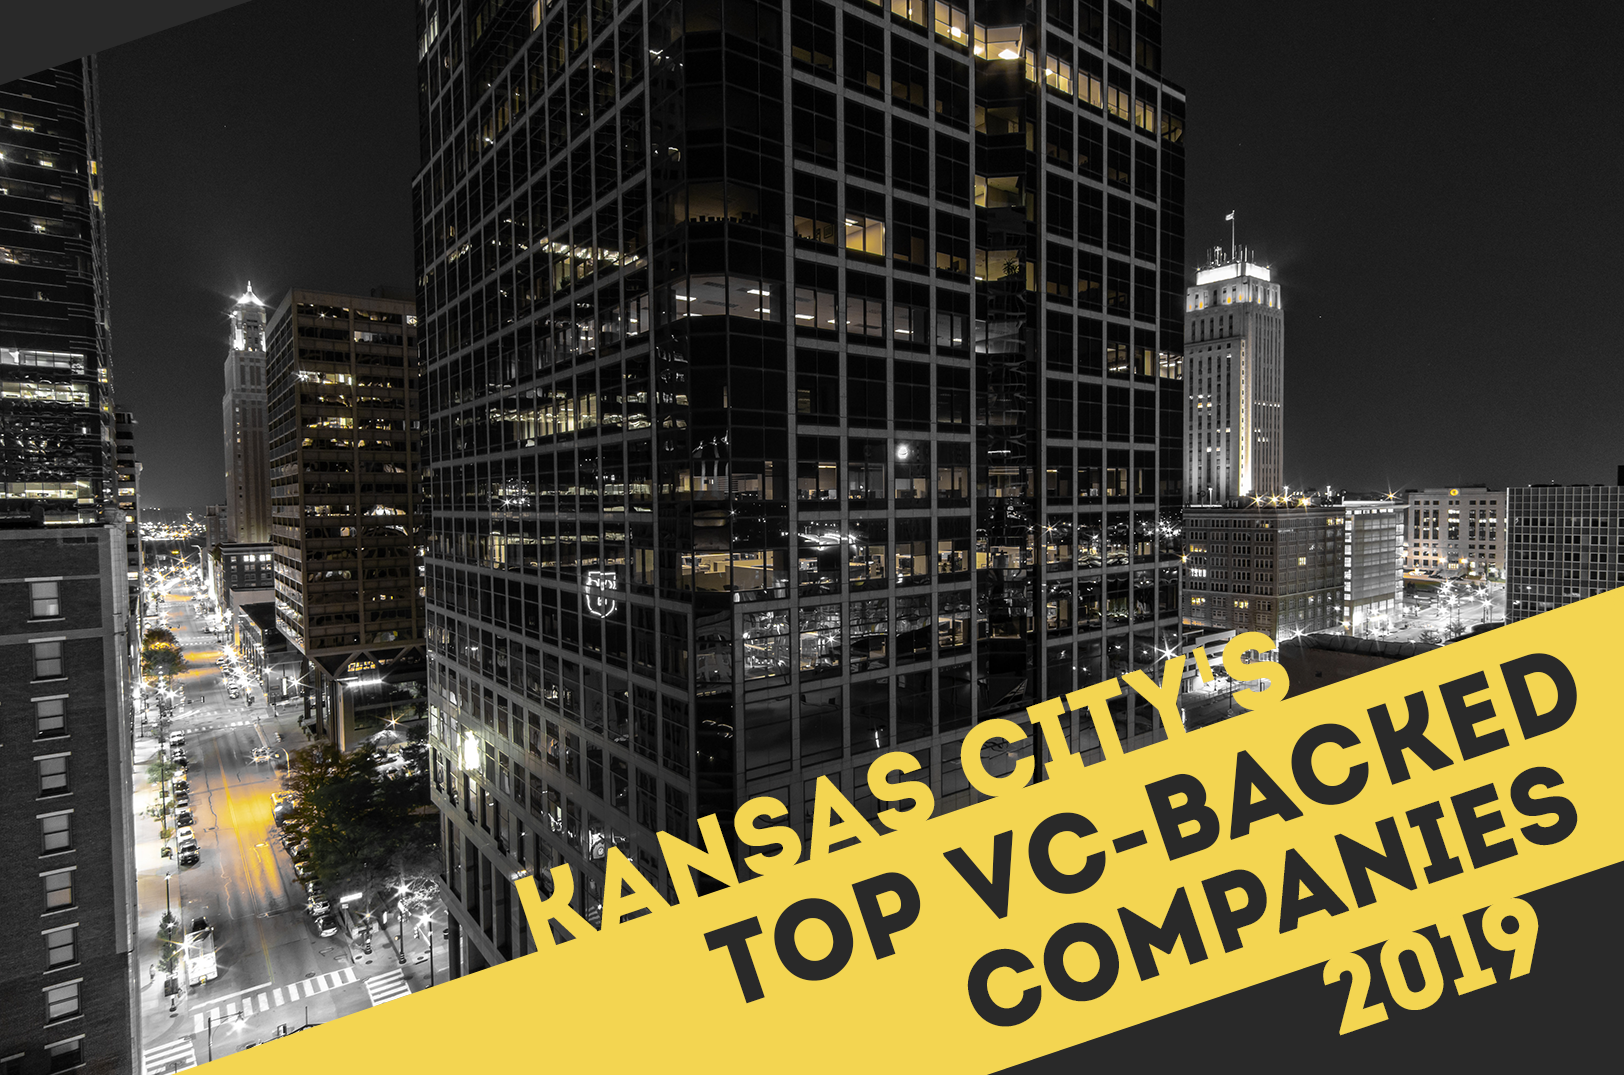 Kansas City's Top VC-Backed Companies in 2019